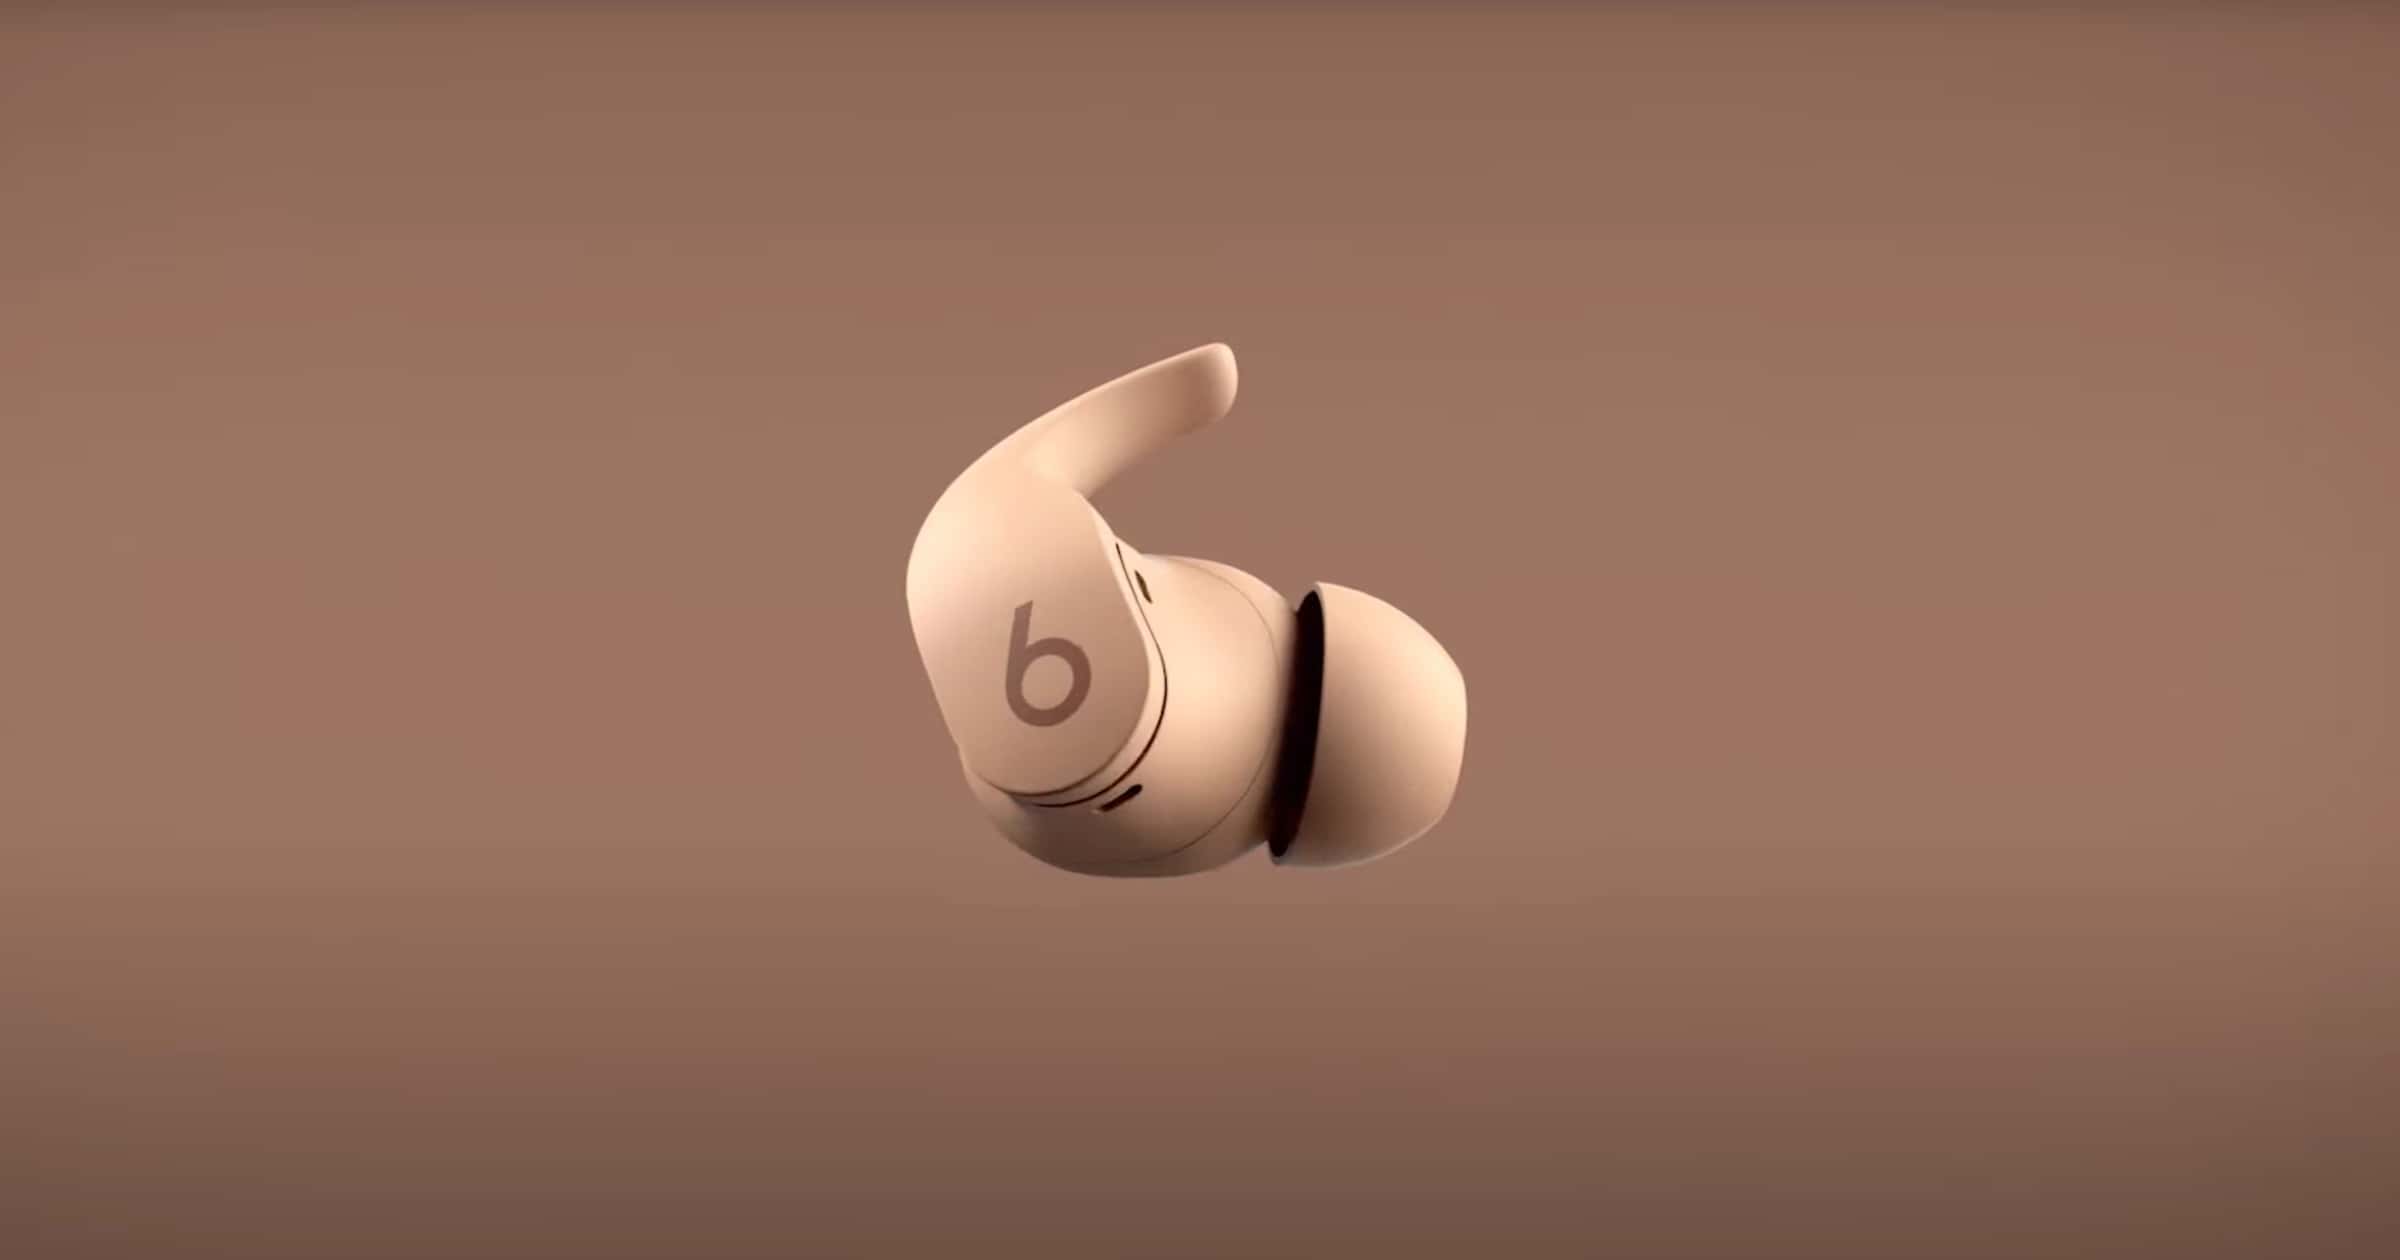 Apple Partners with Kim Kardashian for Beats Fit Pro in Neutral Colors